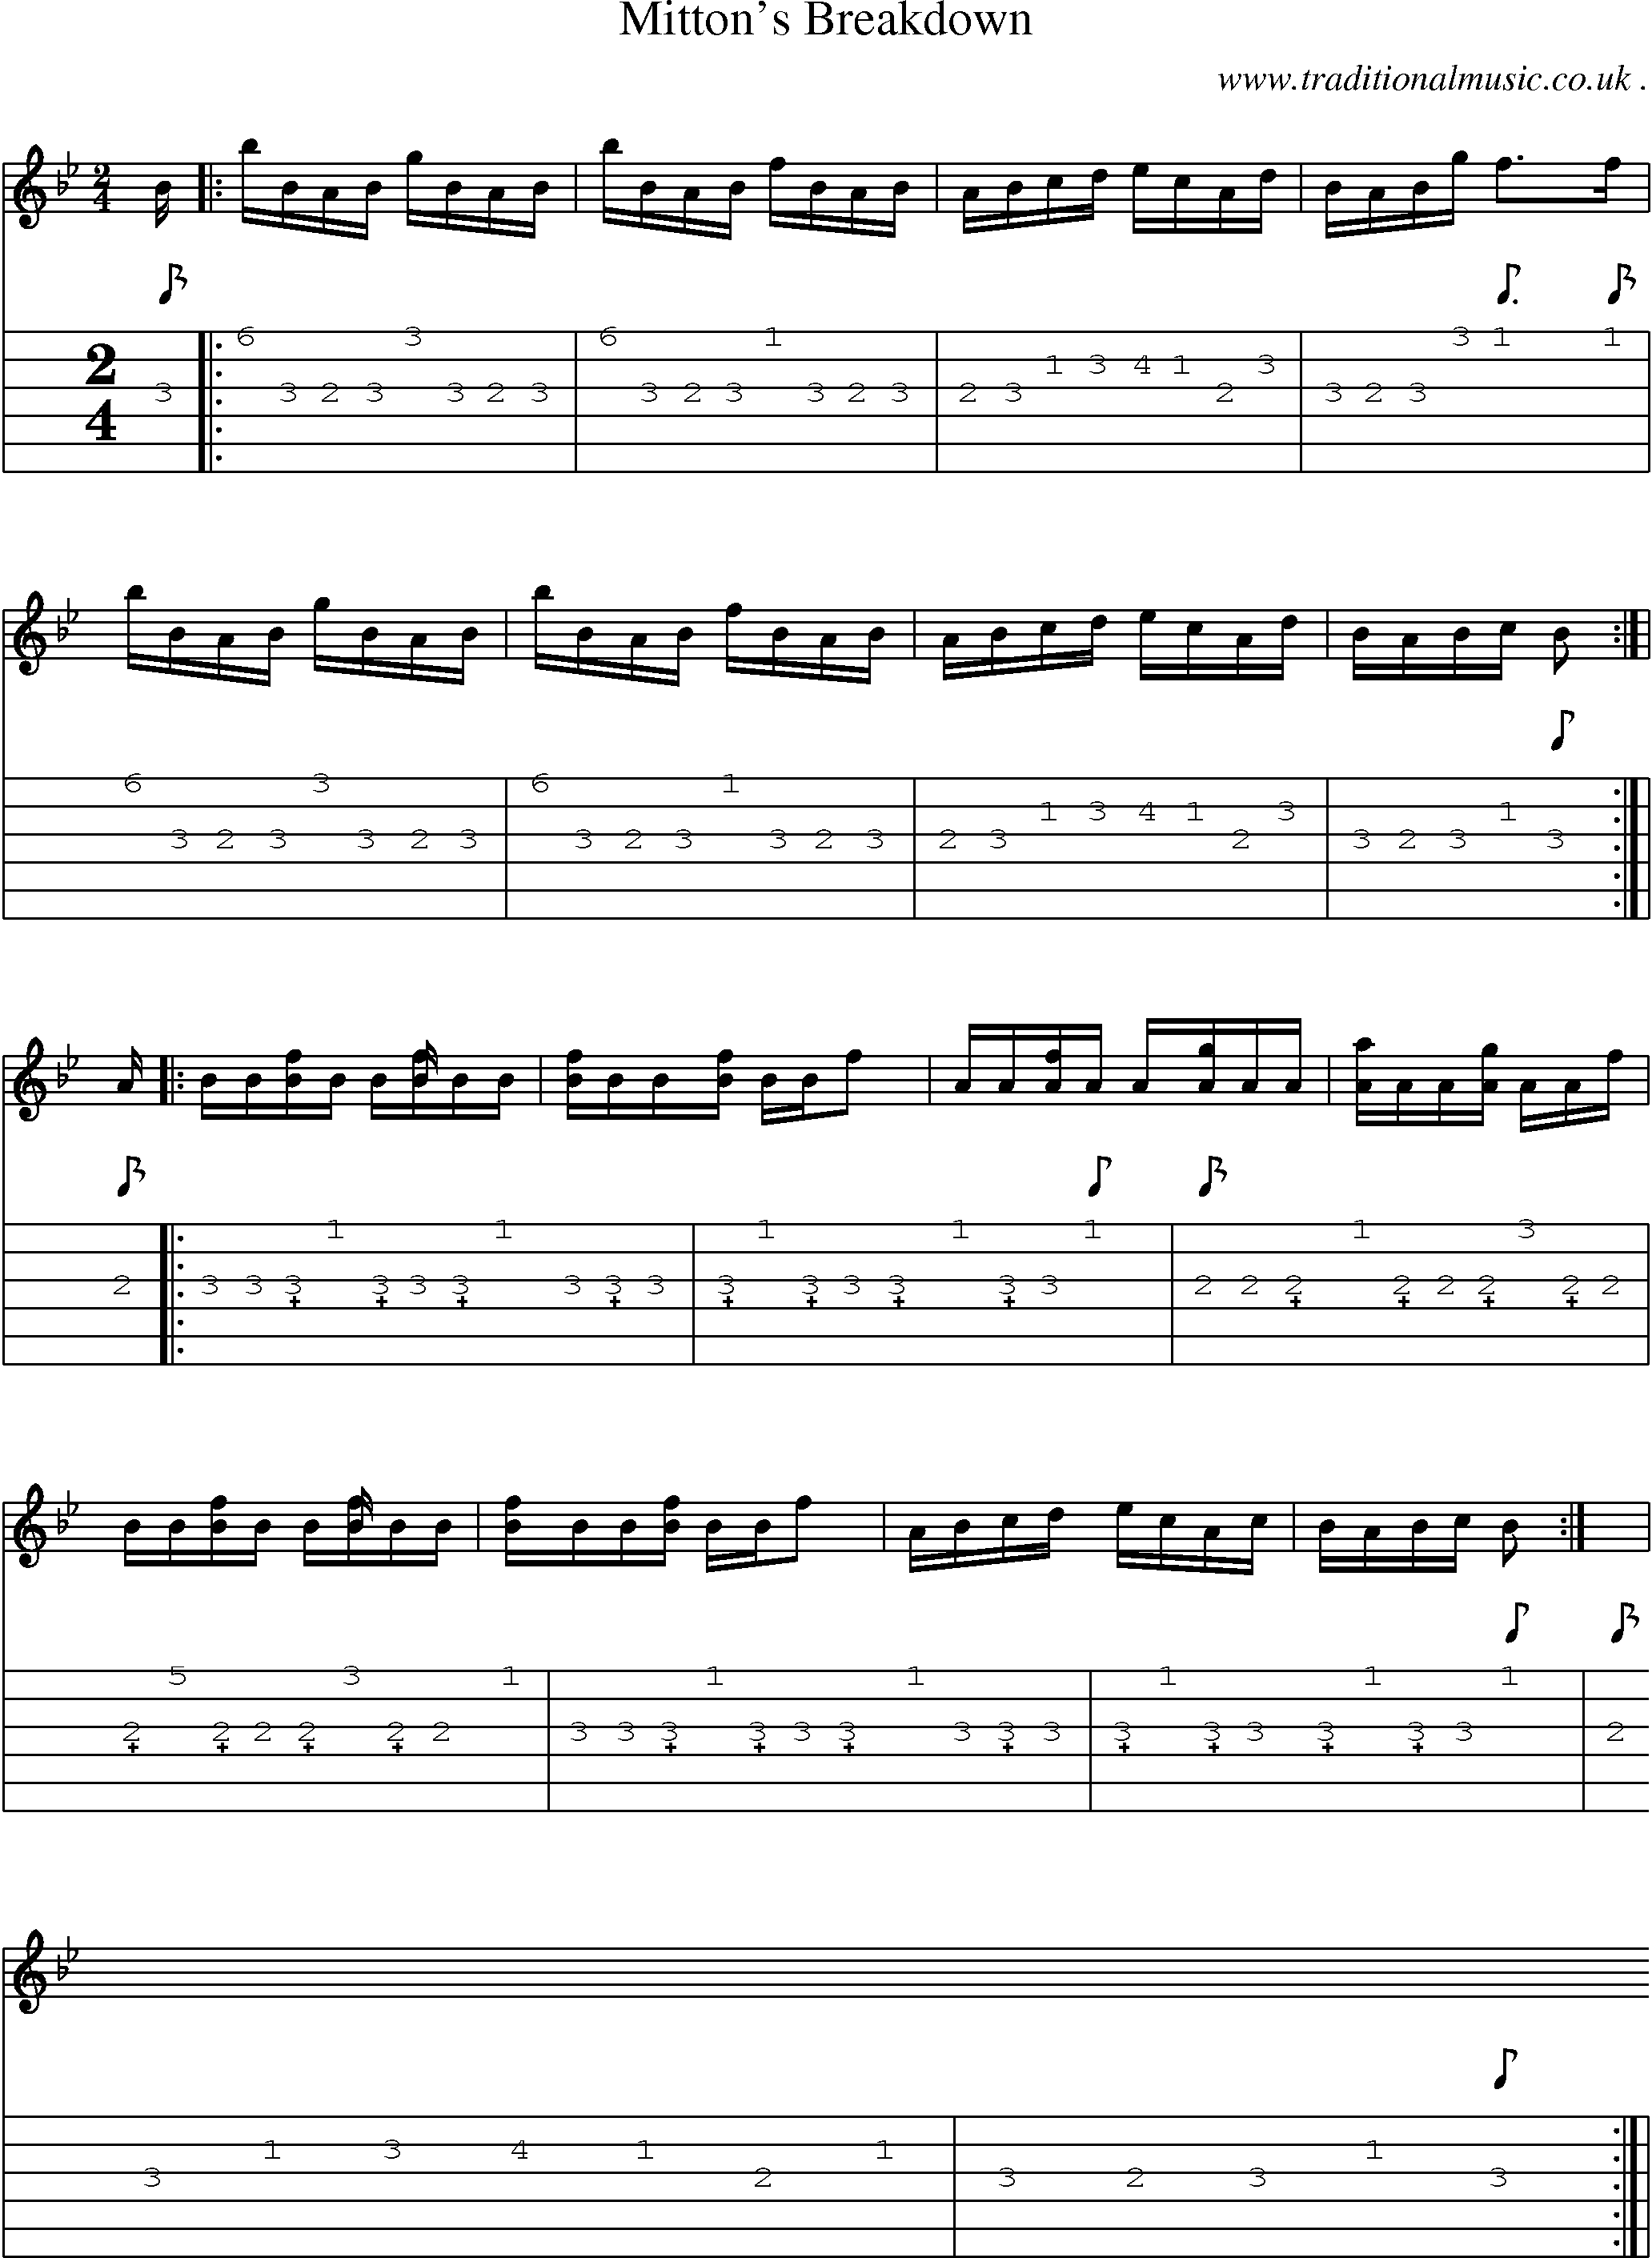 Sheet-Music and Guitar Tabs for Mittons Breakdown